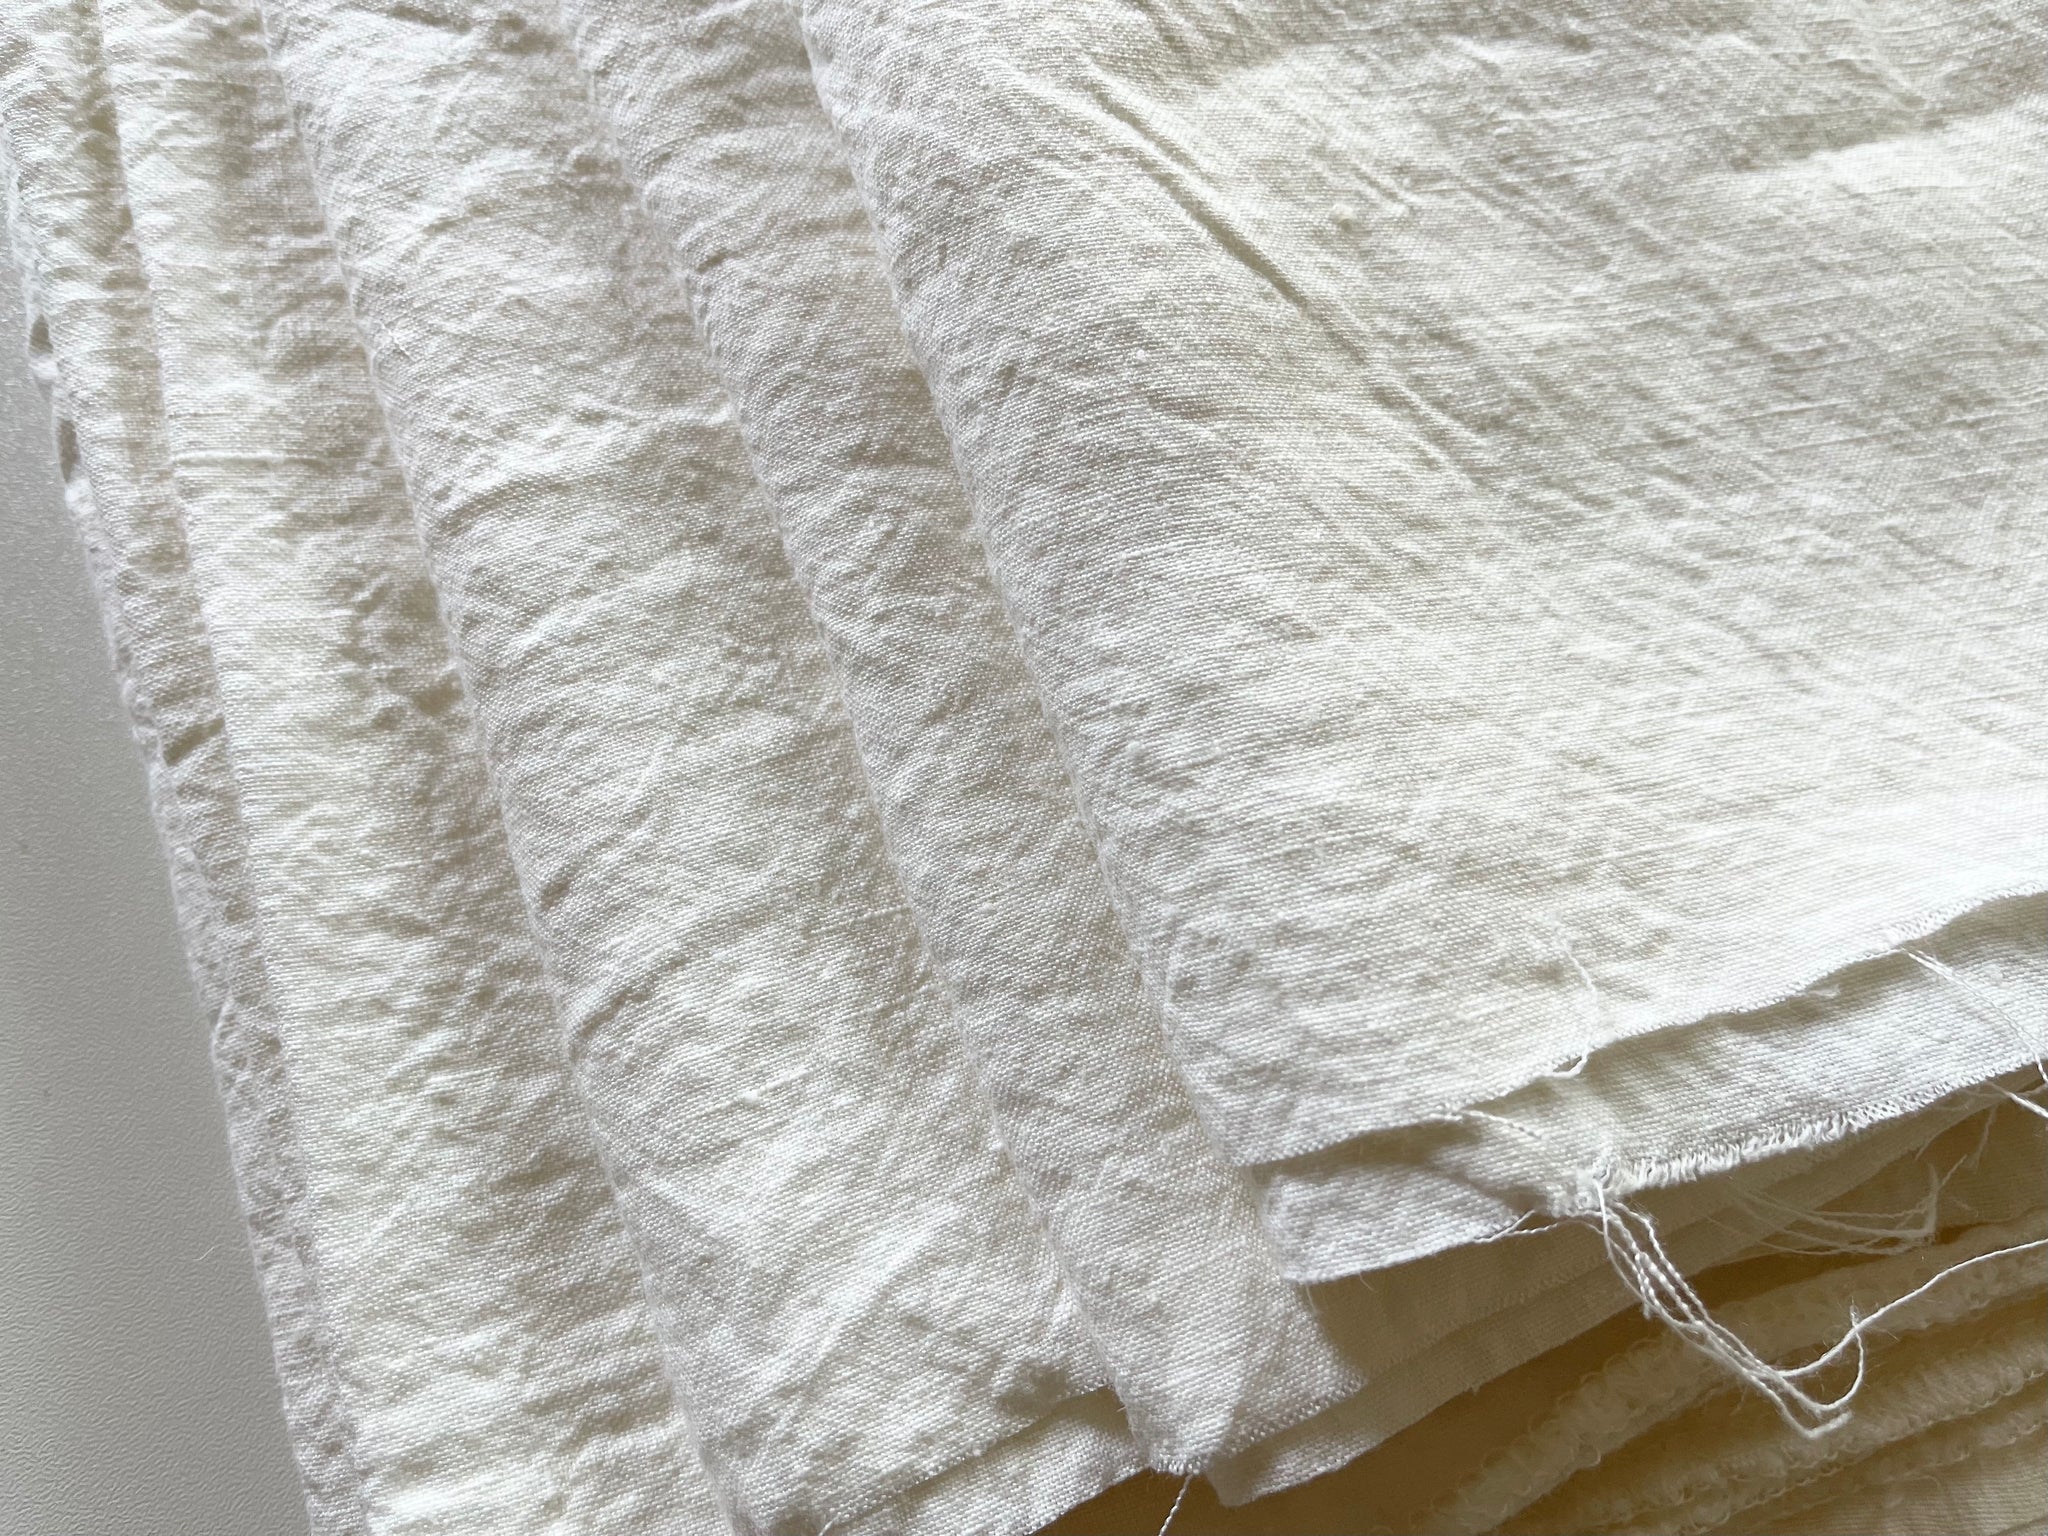 Linen Fabric Remnants - Ivory Stone Washed - approx. 2 yards